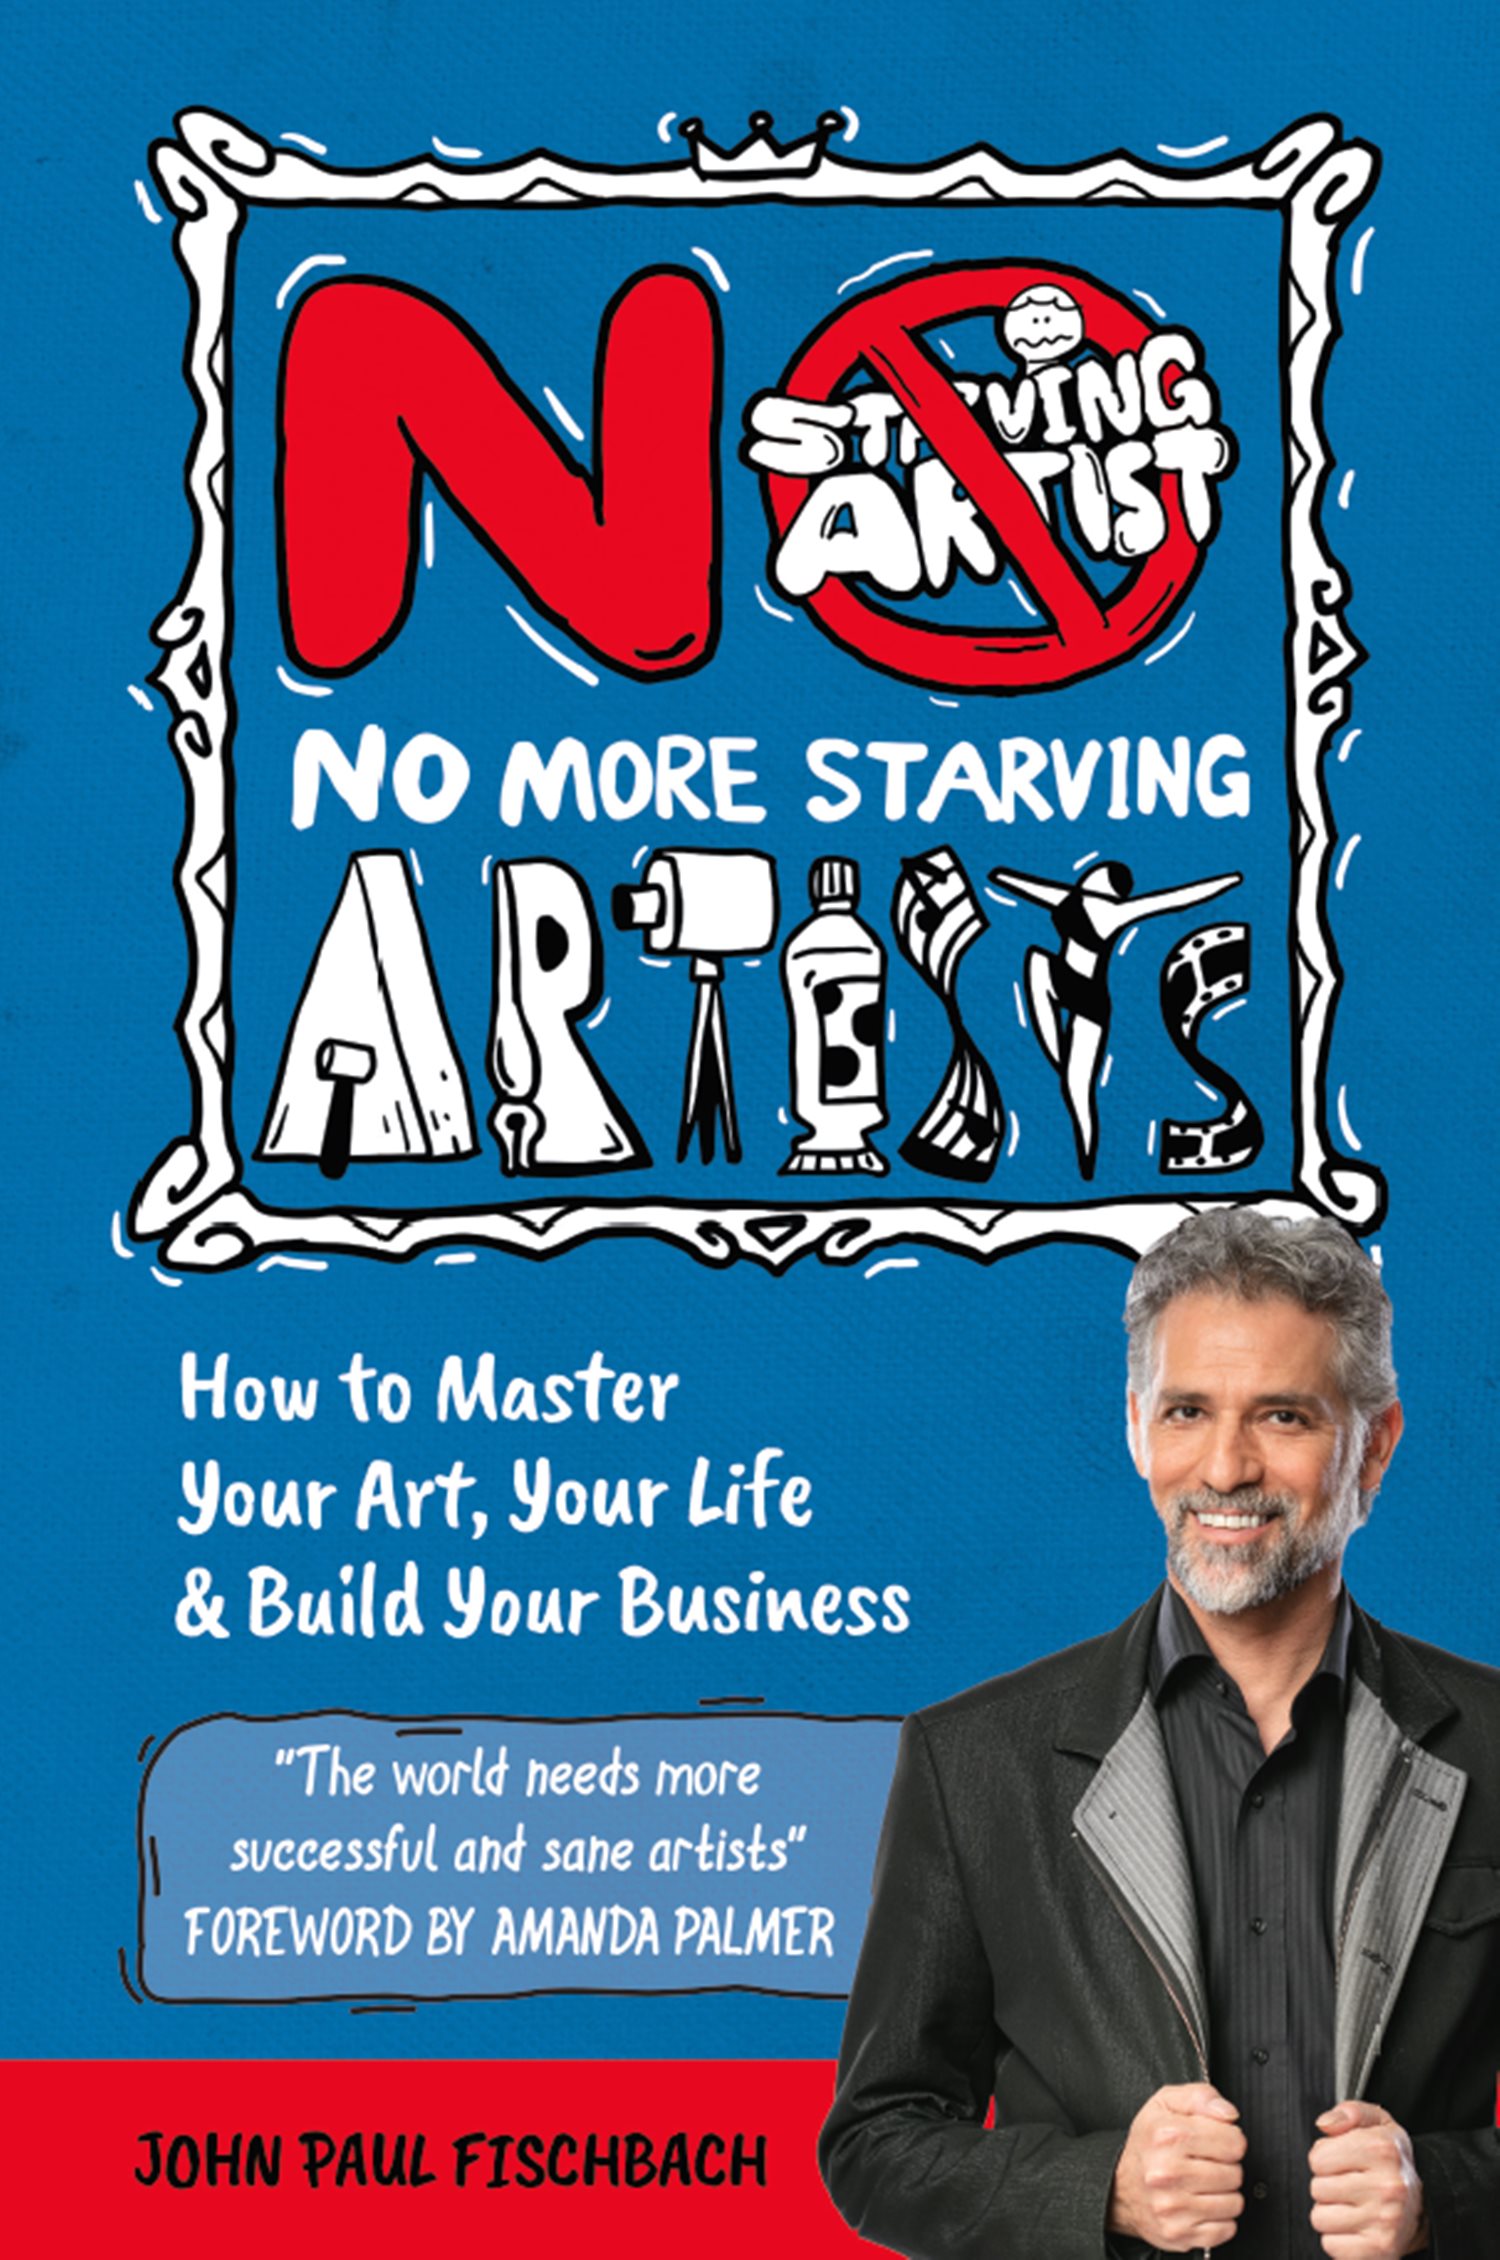 No More Starving Artists